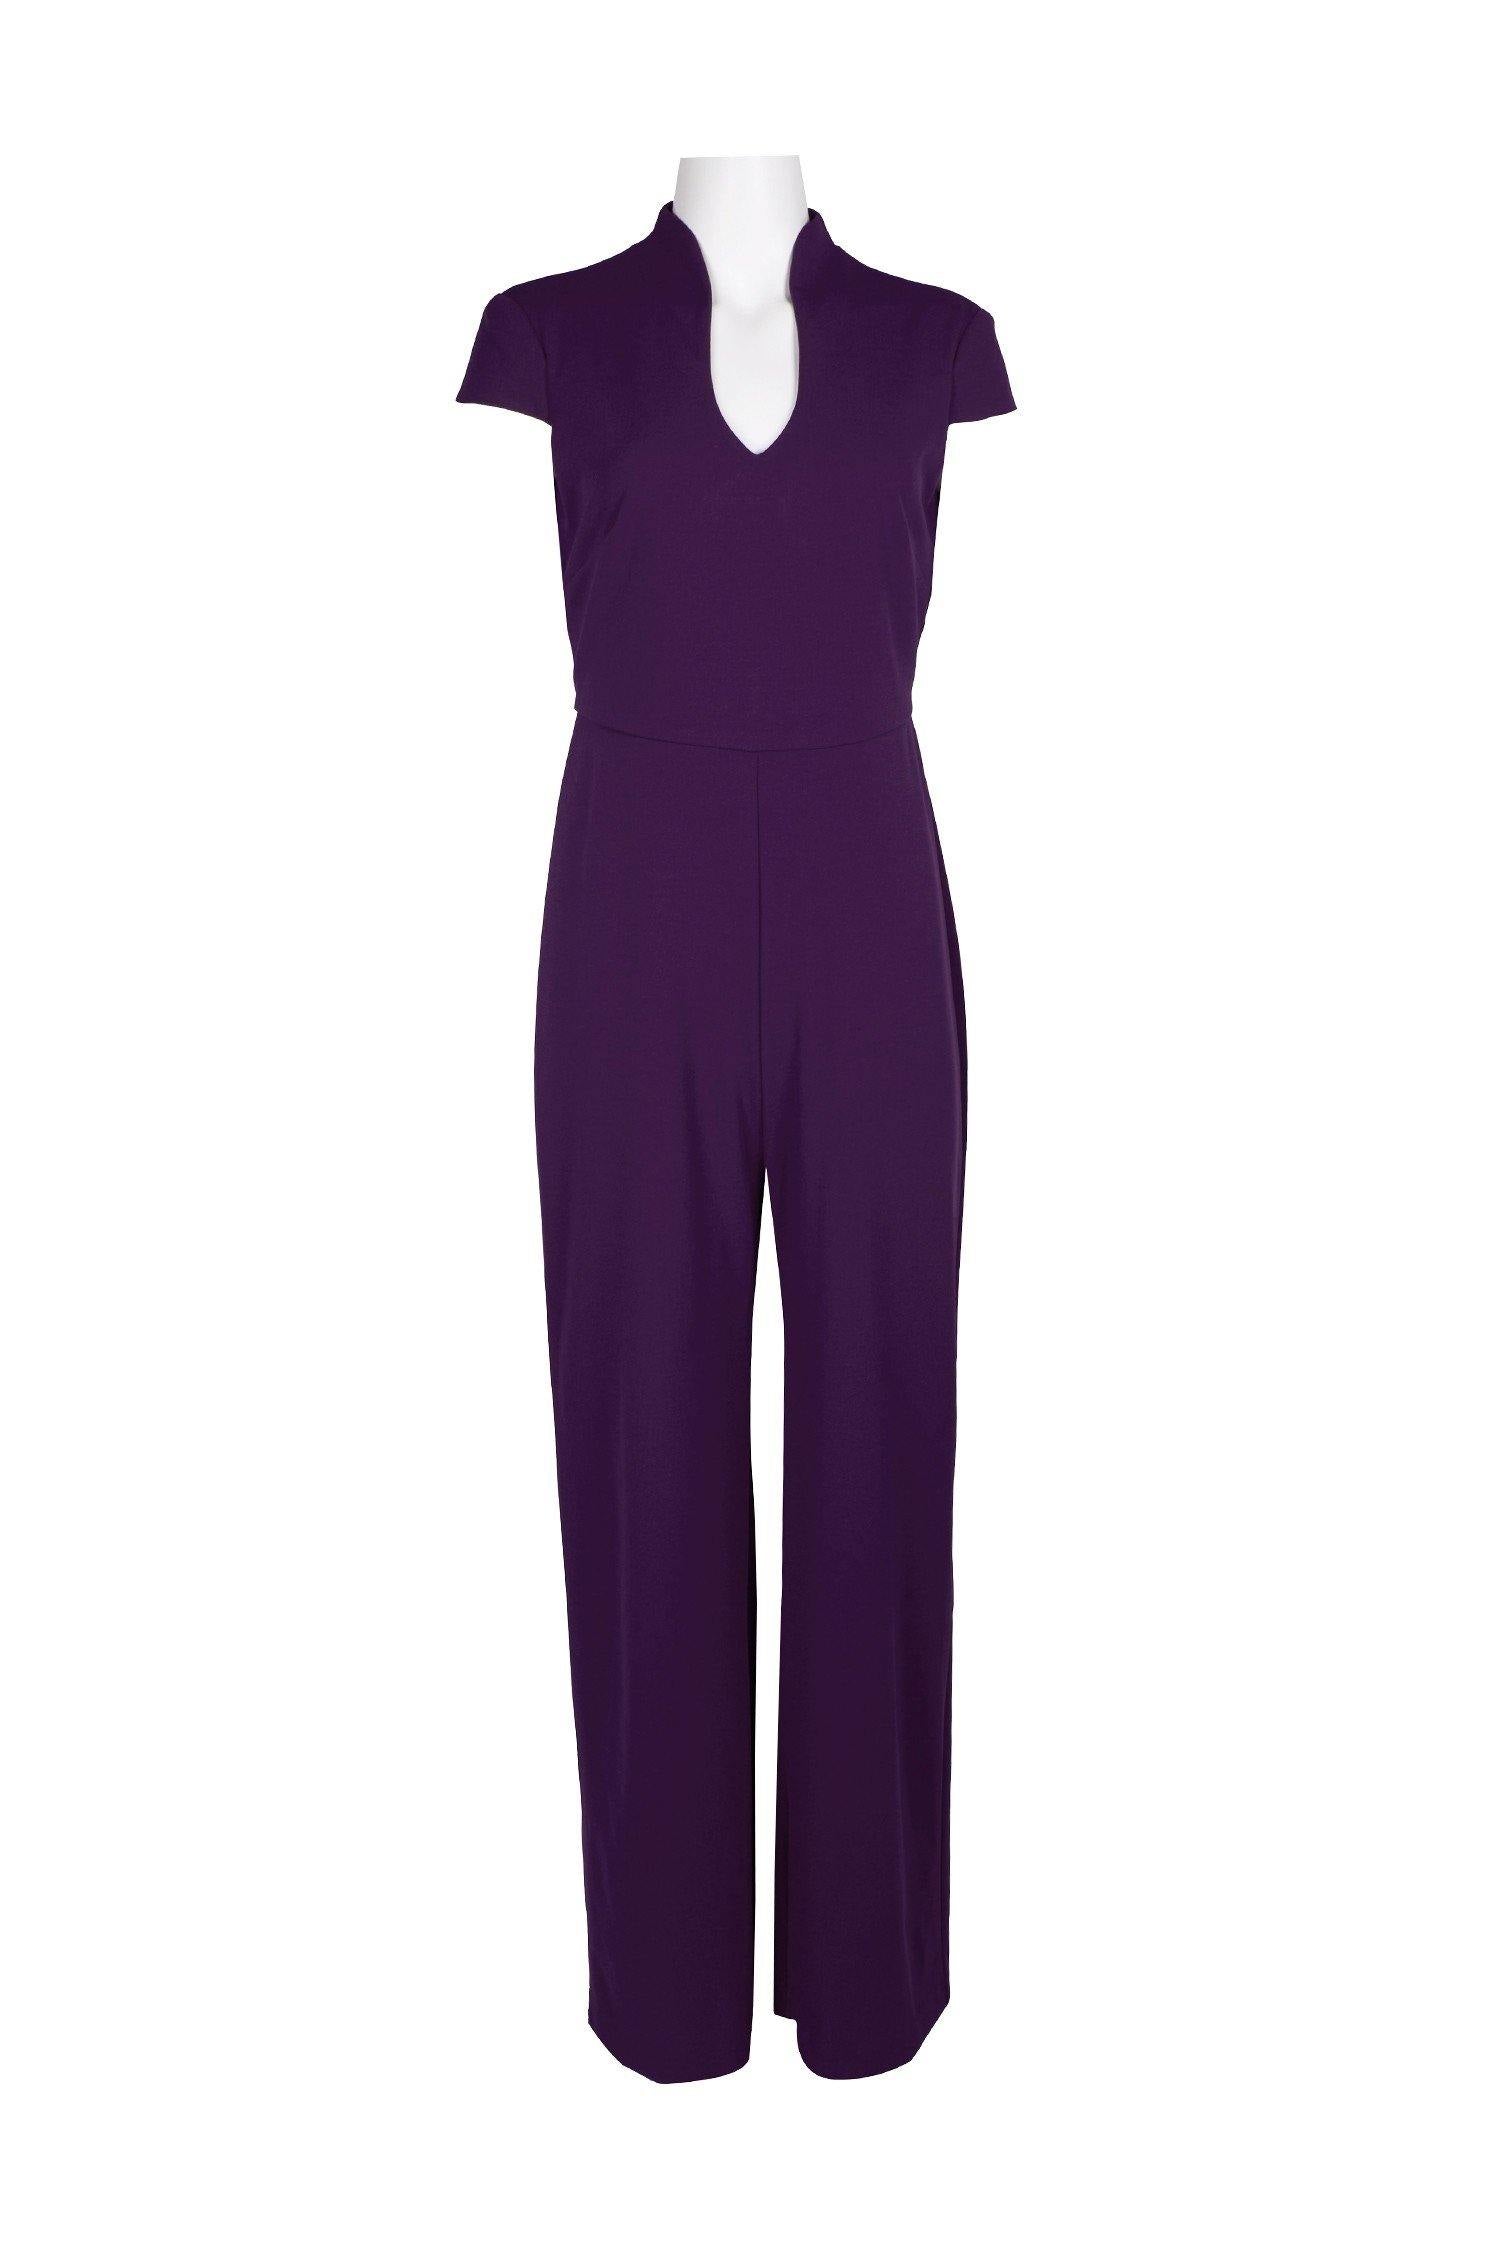 Connected Apparel Formal Short Sleeve Jumpsuit - The Dress Outlet